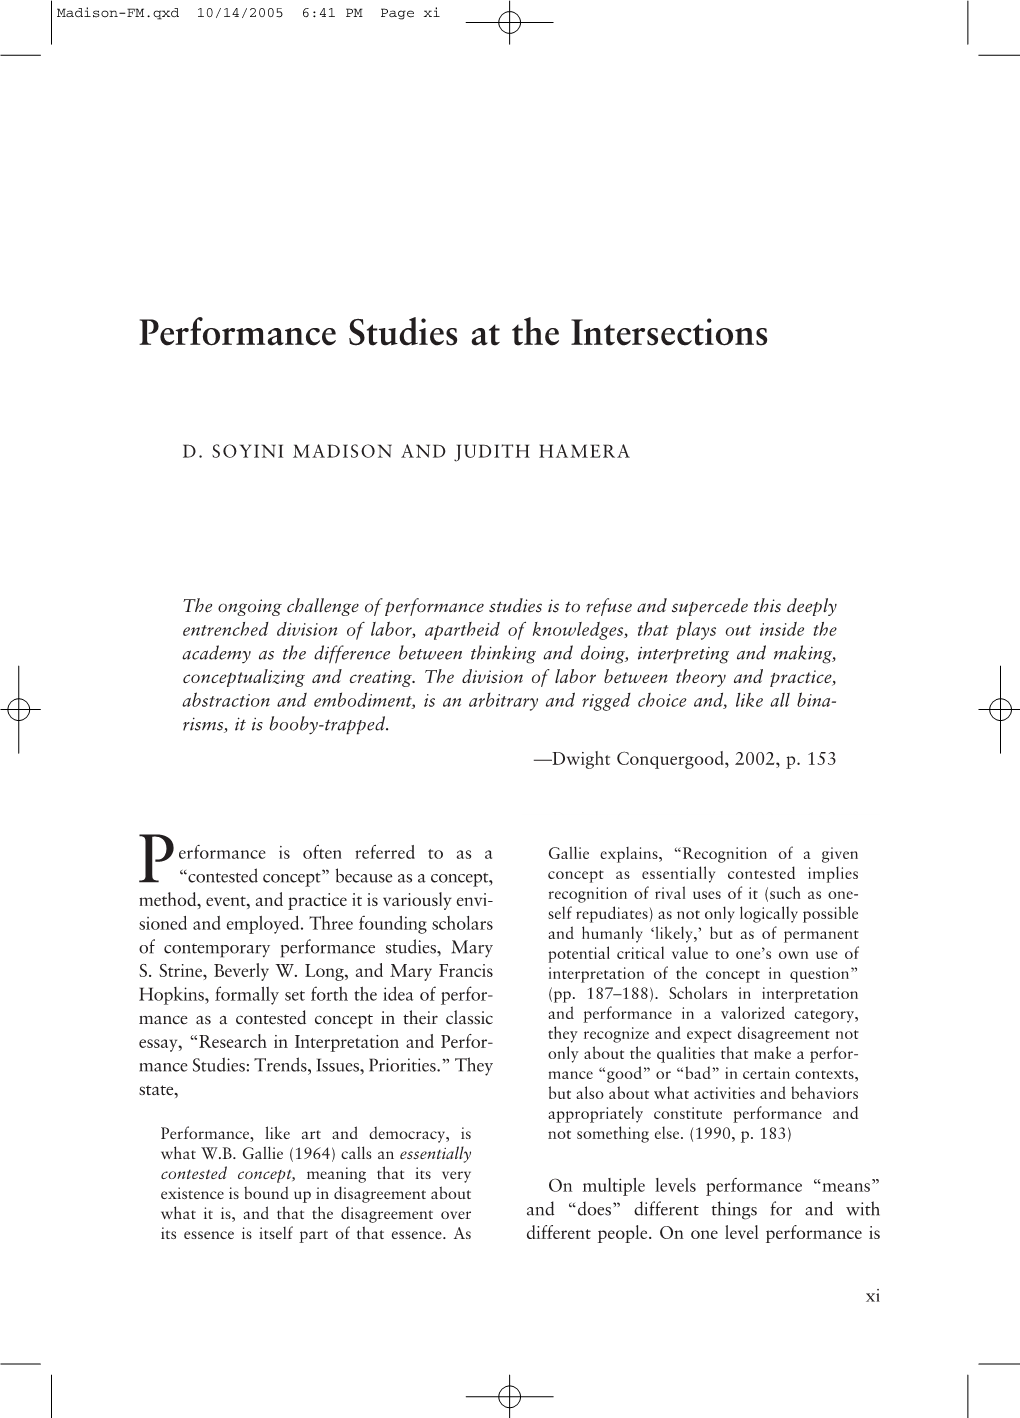 Performance Studies at the Intersections